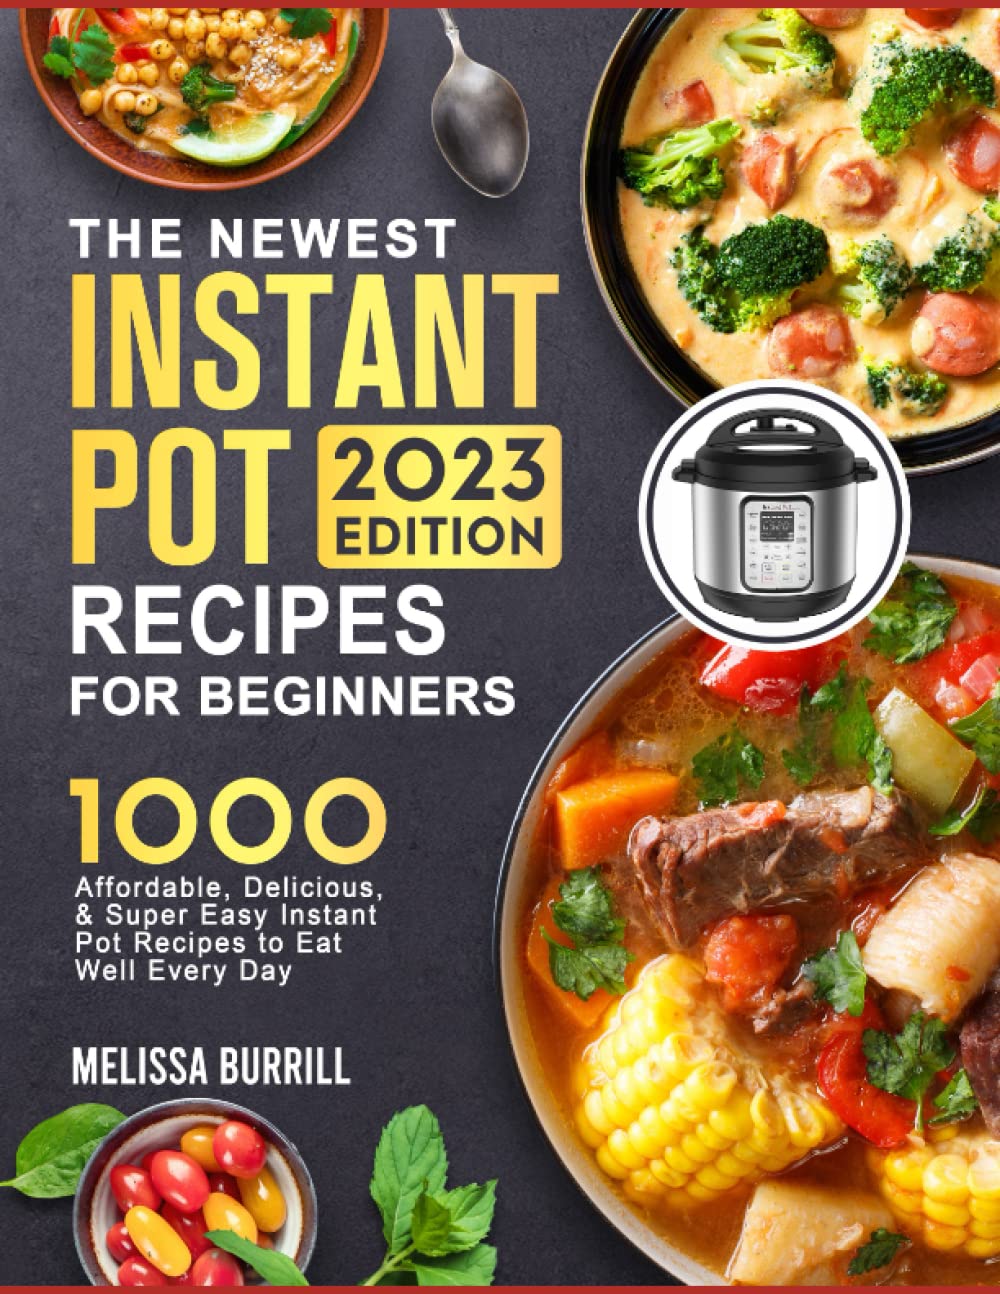 The Complete Instant Pot Cookbook 2023: 1000+ Super Easy, Delicious & Healthy Instant Pot Recipes That Turn Out Perfectly for Beginners and Advanced Users